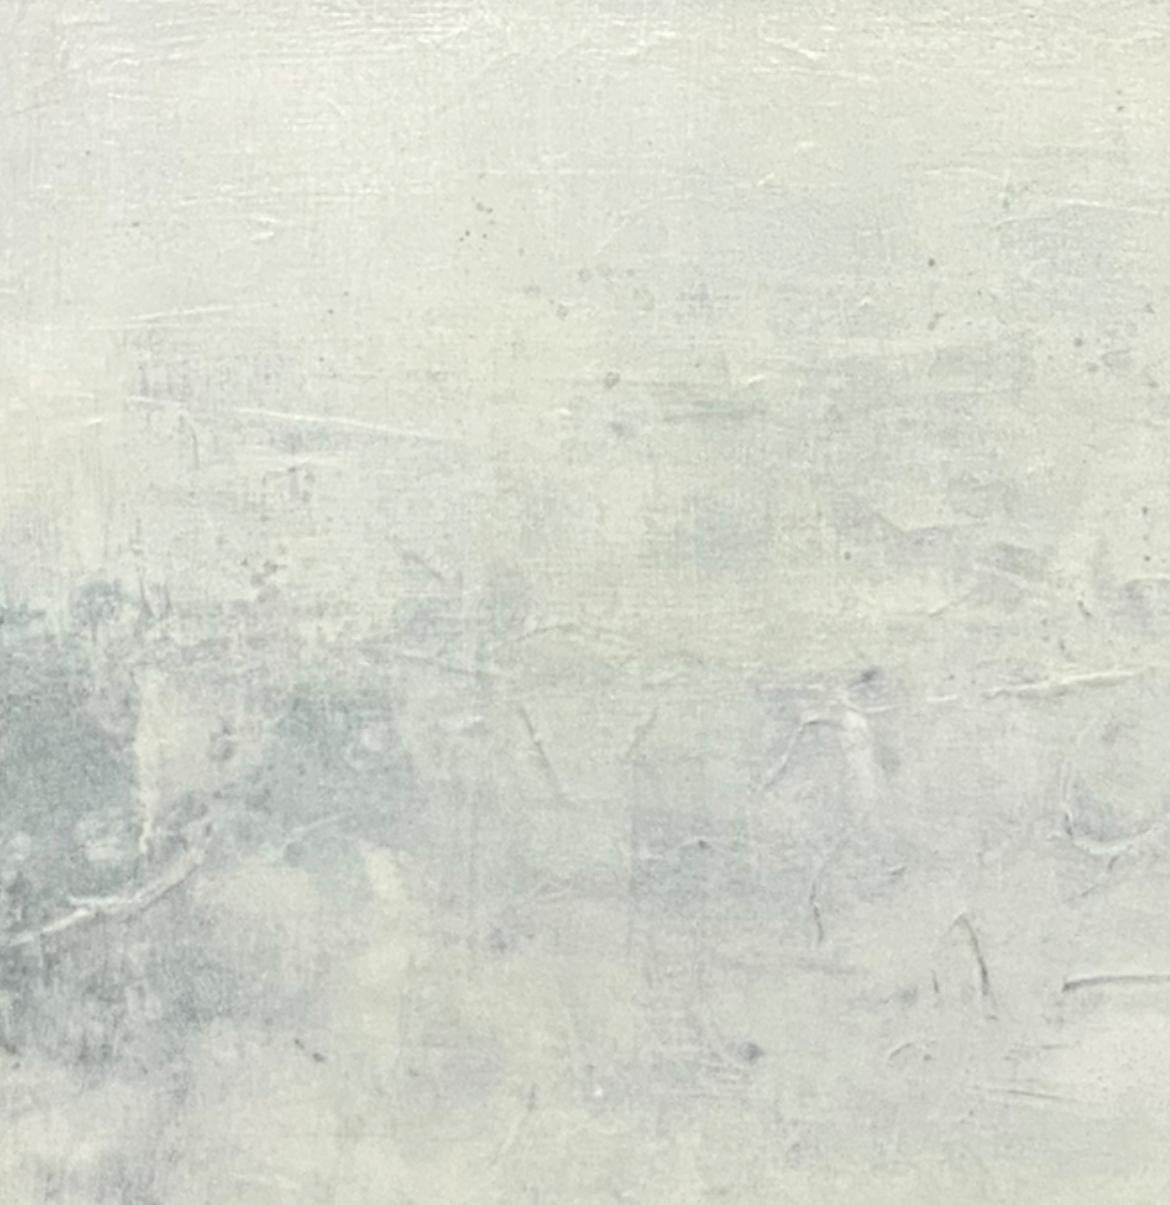 It was a misty day, Contemporary landscape, seafoam, ethereal abstract,   - Painting by Juanita Bellavance 